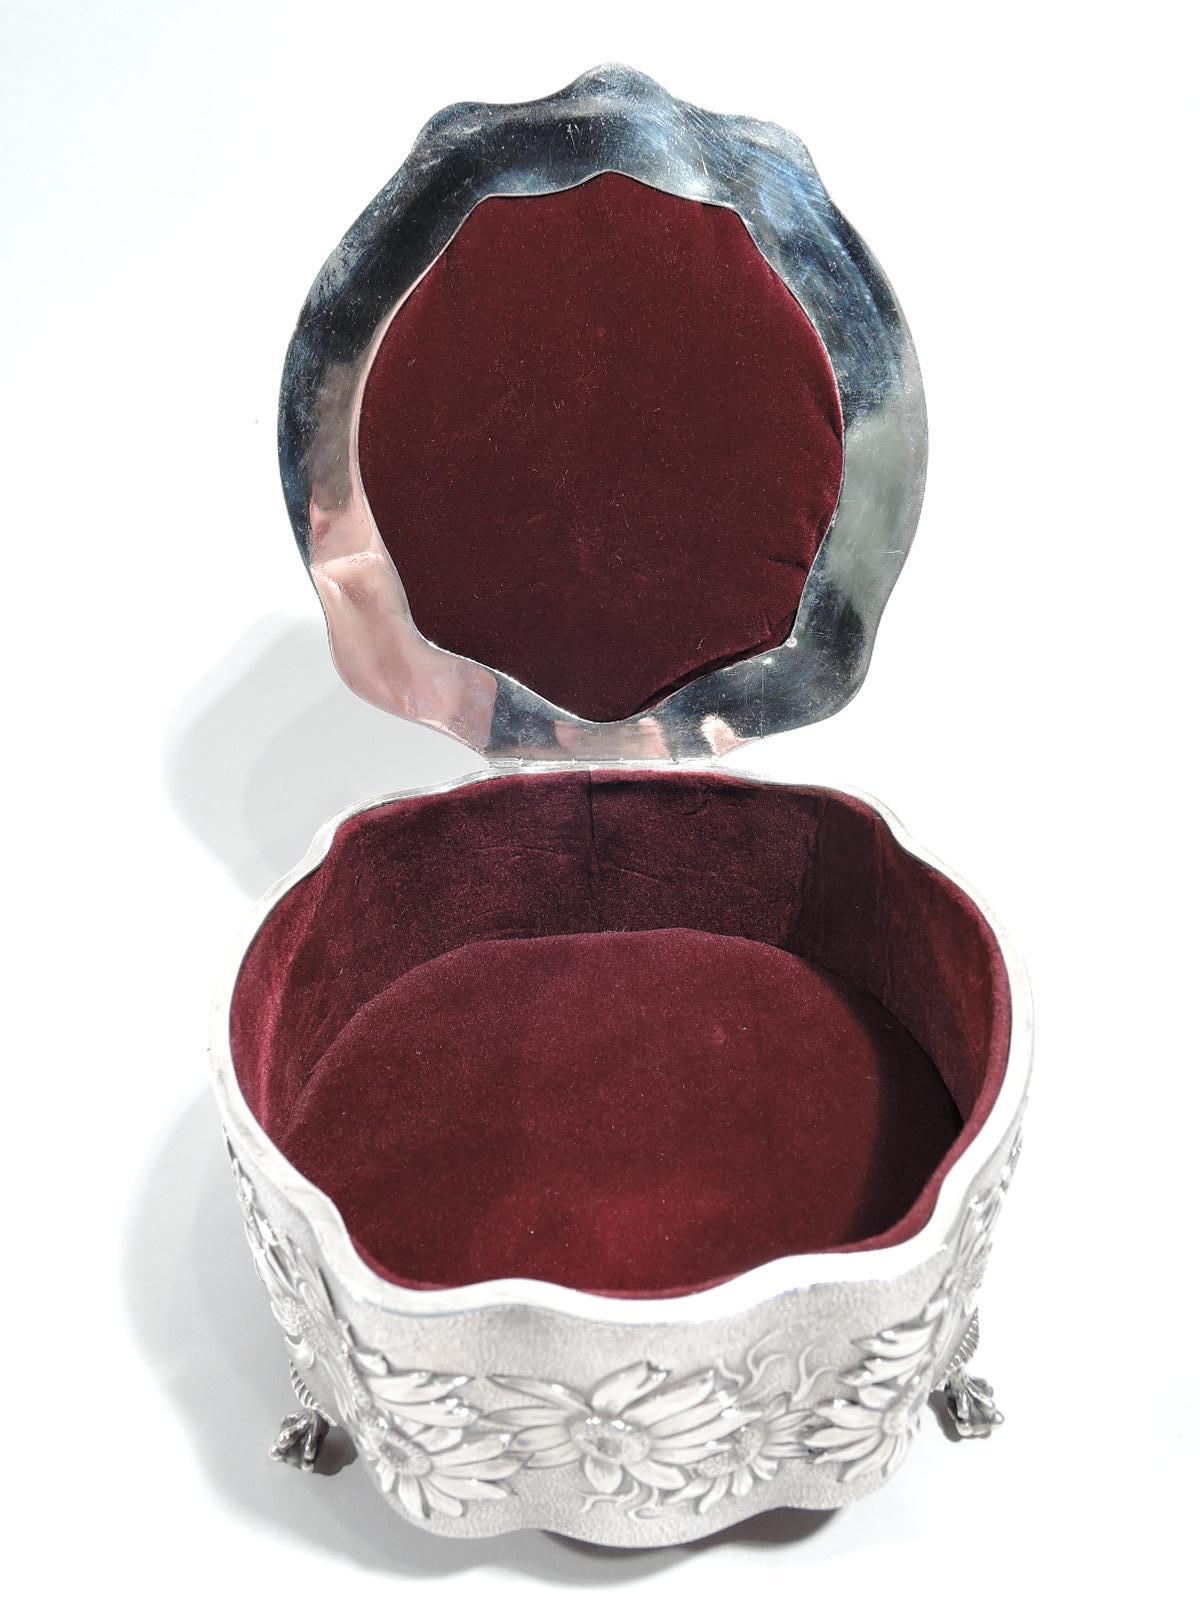 Edwardian Art Nouveau sterling silver box. Made by Levi & Salaman in Birmingham in 1904. Round and wavy form with straight sides and overhanging hinged cover. On cover top in voluptuous relief is scene of daisy divination inspired by Goethe’s Faust